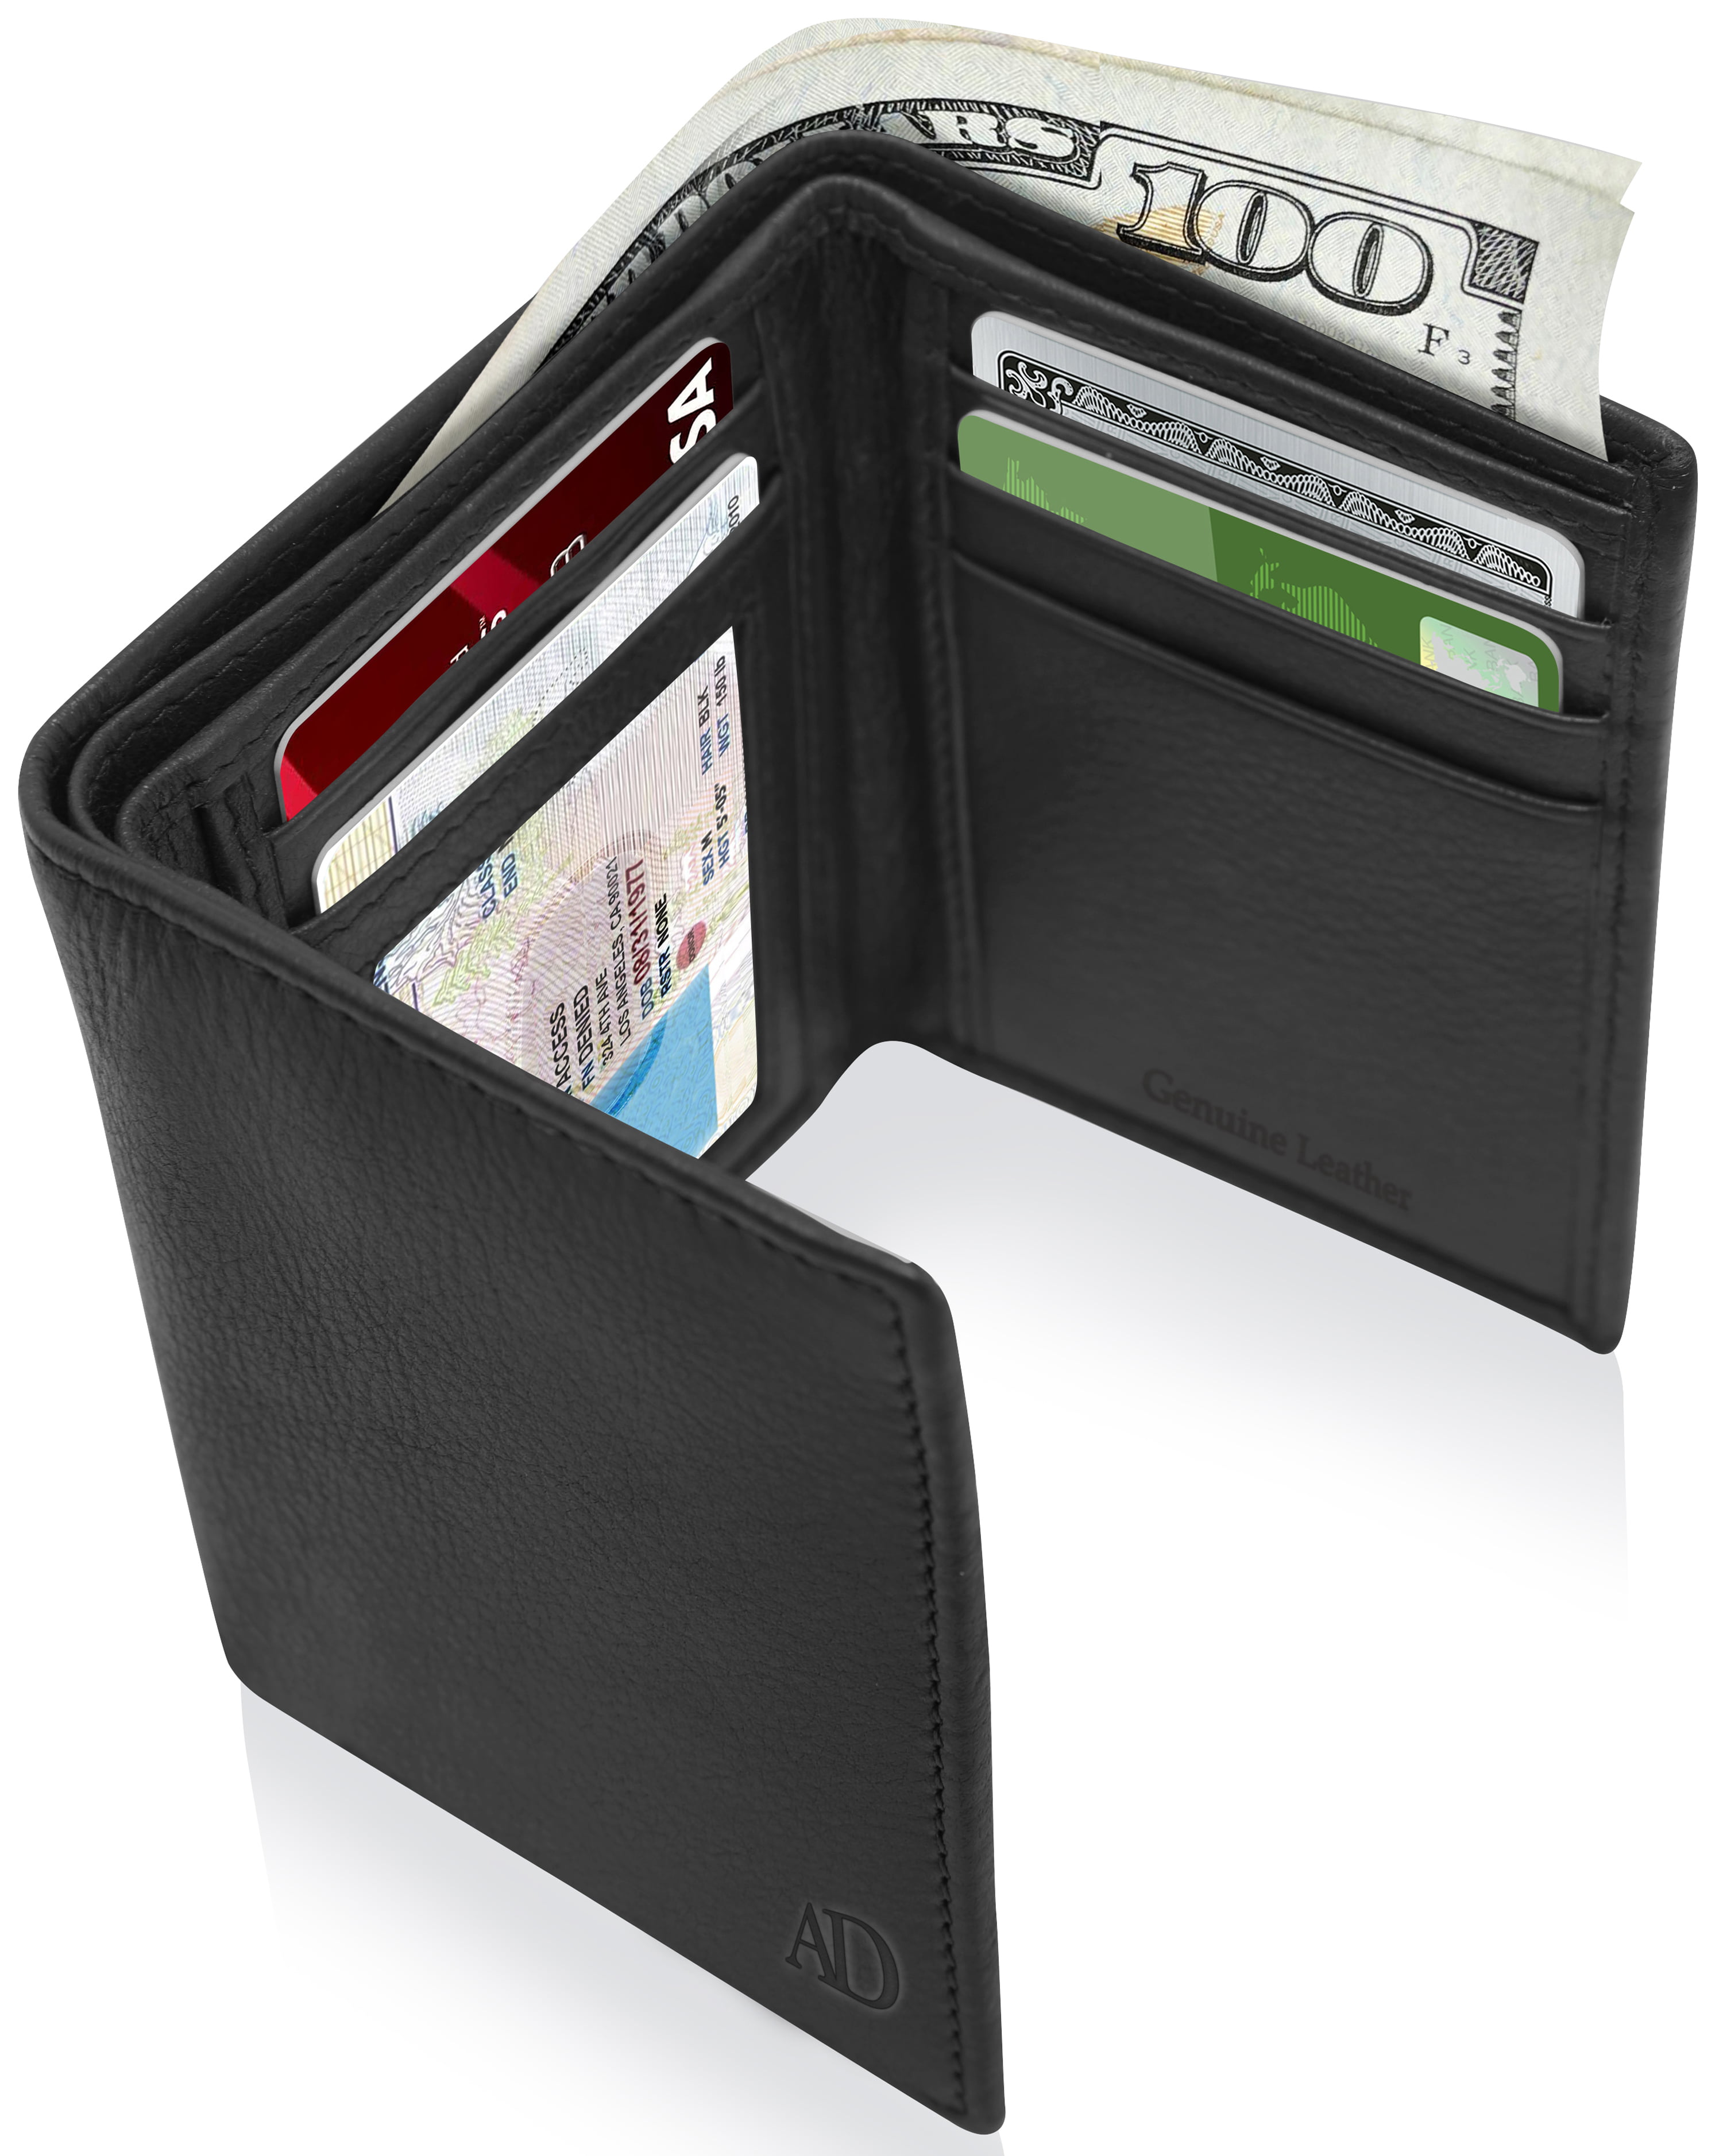 Genuine Leather Wallets For Men - Trifold Mens Wallet With ID Window RFID Blocking - www.bagssaleusa.com